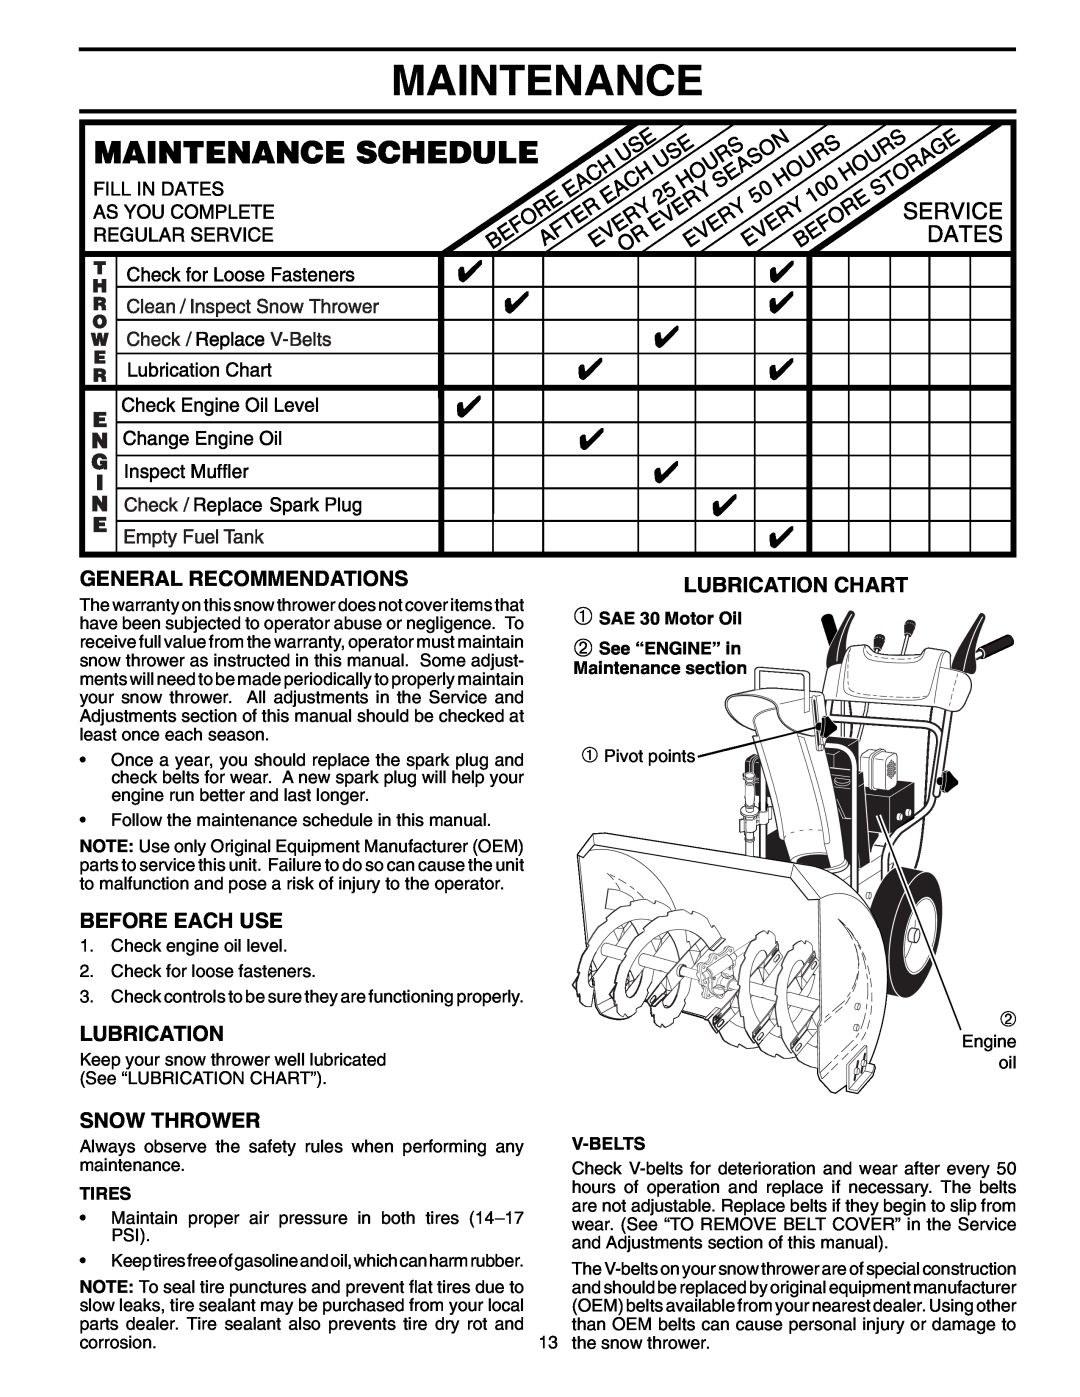 Poulan PO5524 Maintenance, General Recommendations, Before Each Use, Lubrication Chart, Snow Thrower, Tires, V-Belts 